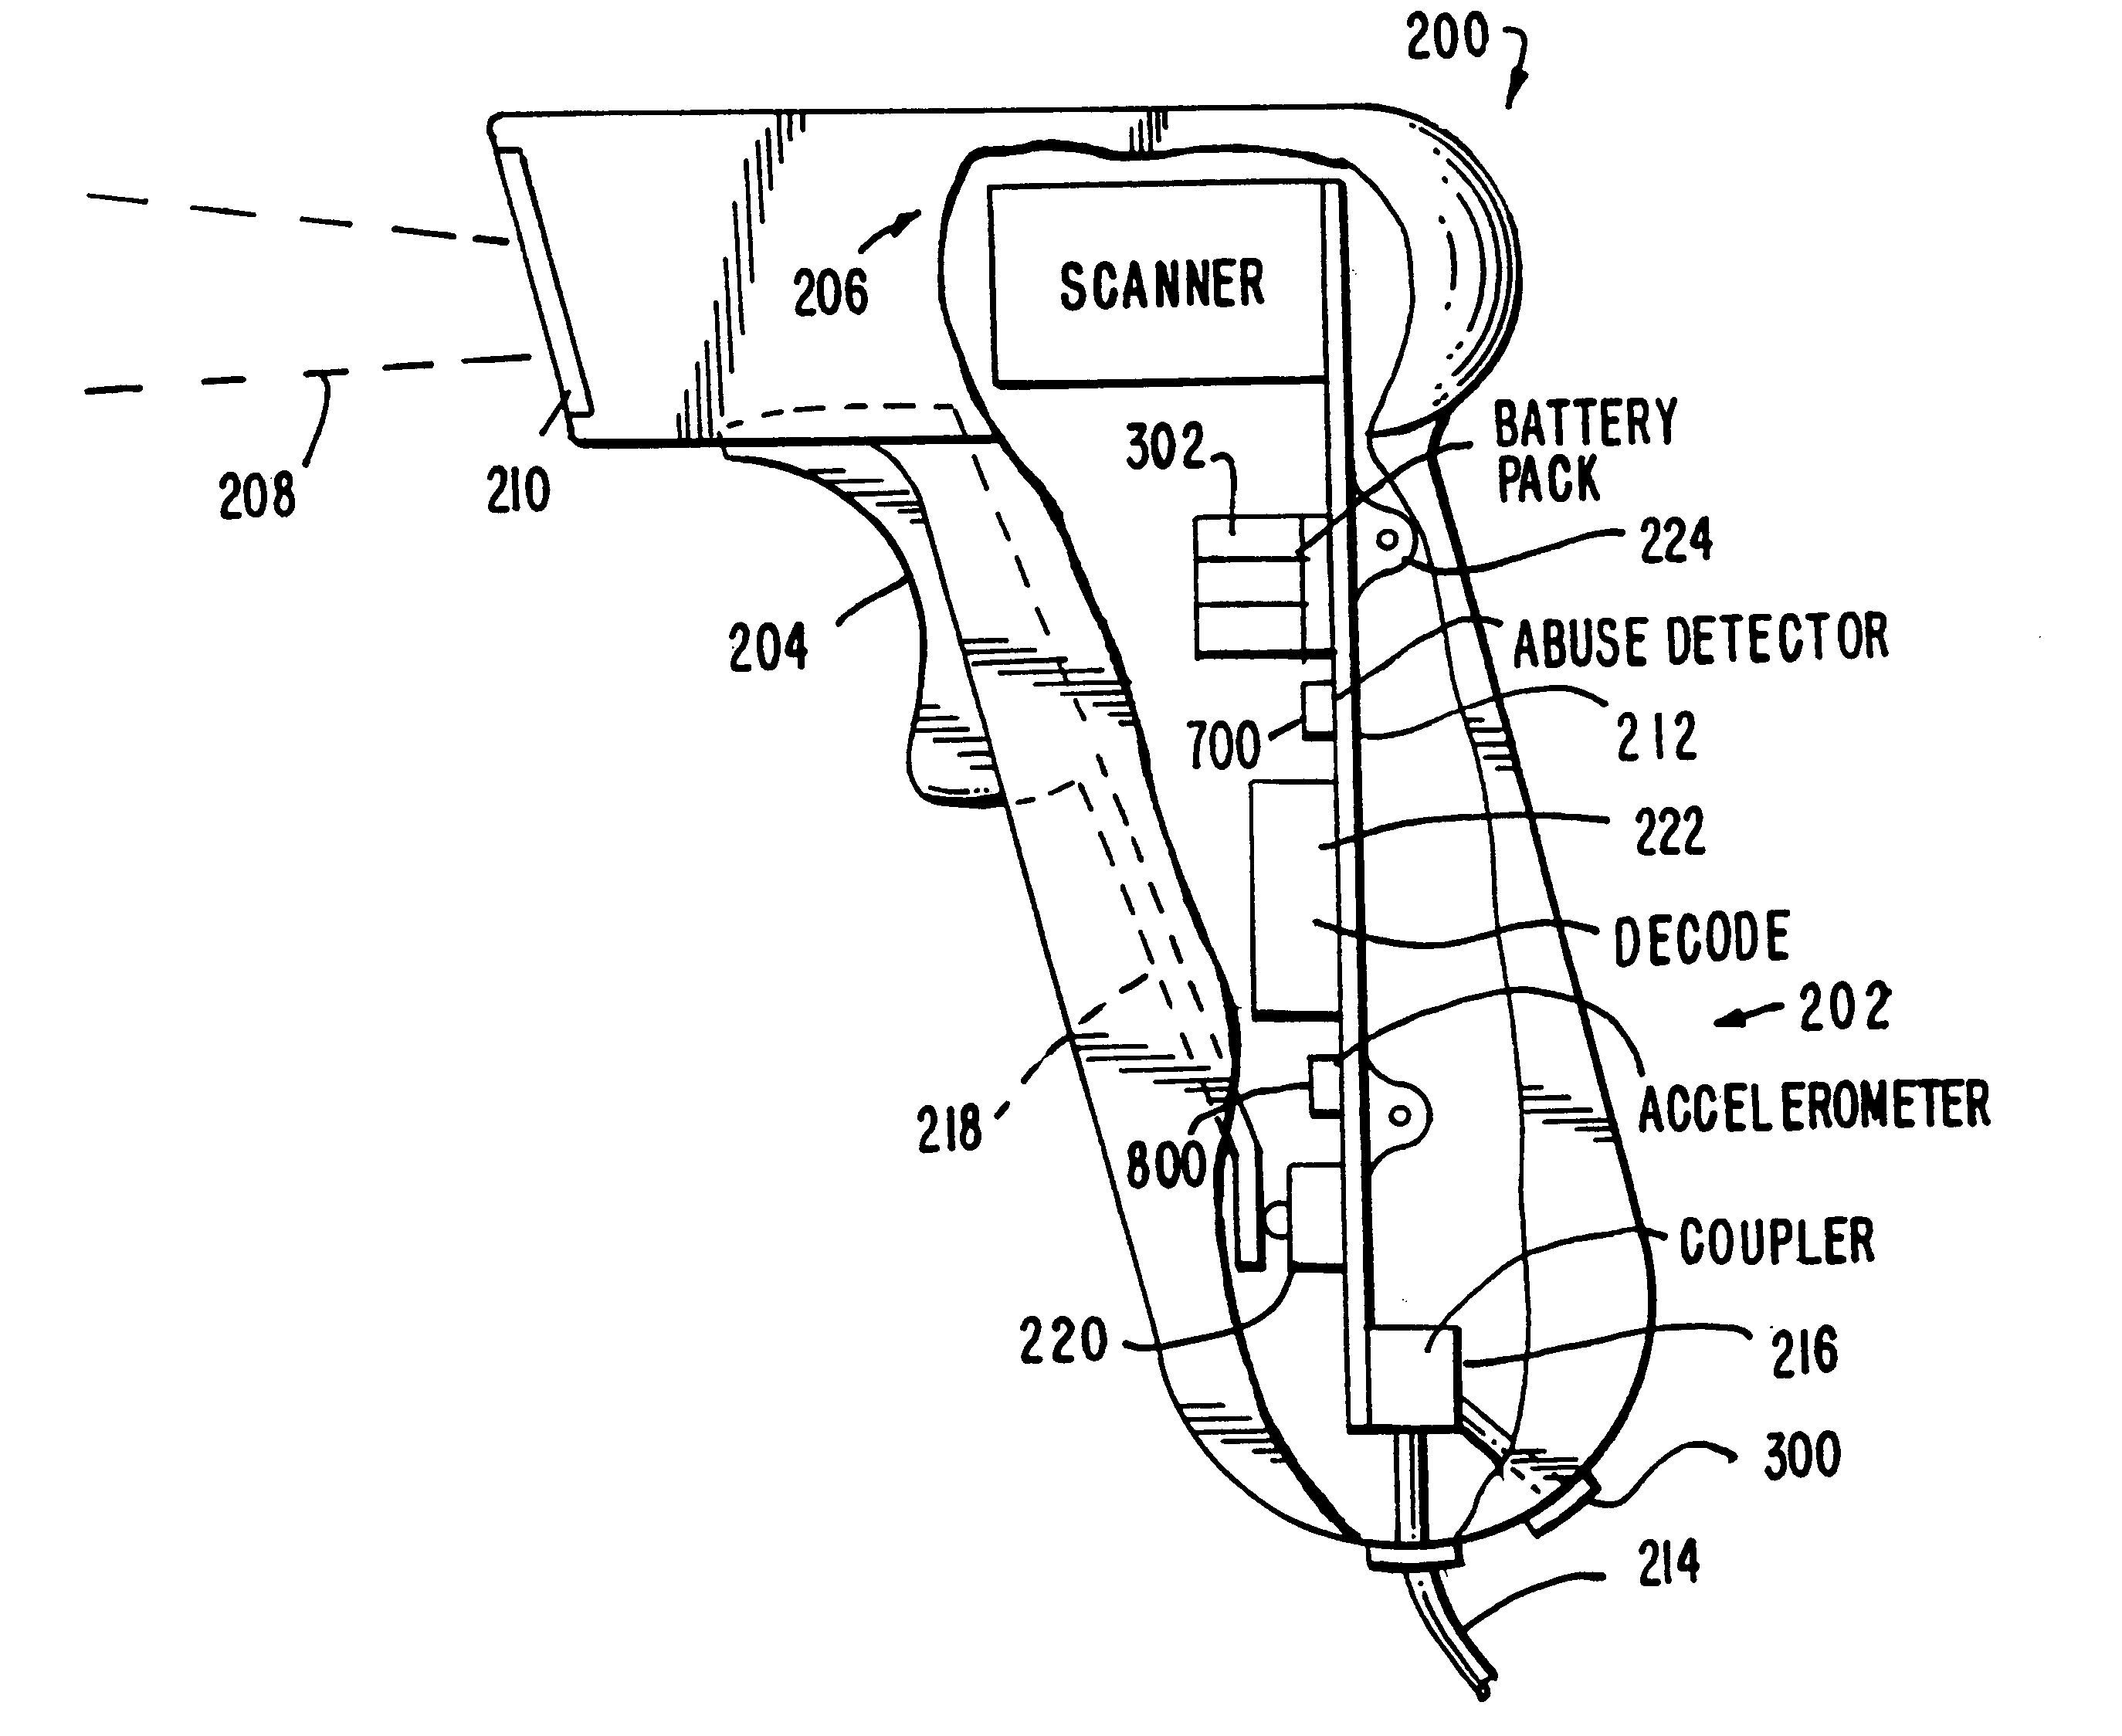 Bar code reader with an integrated scanning component module mountable on printed circuit board